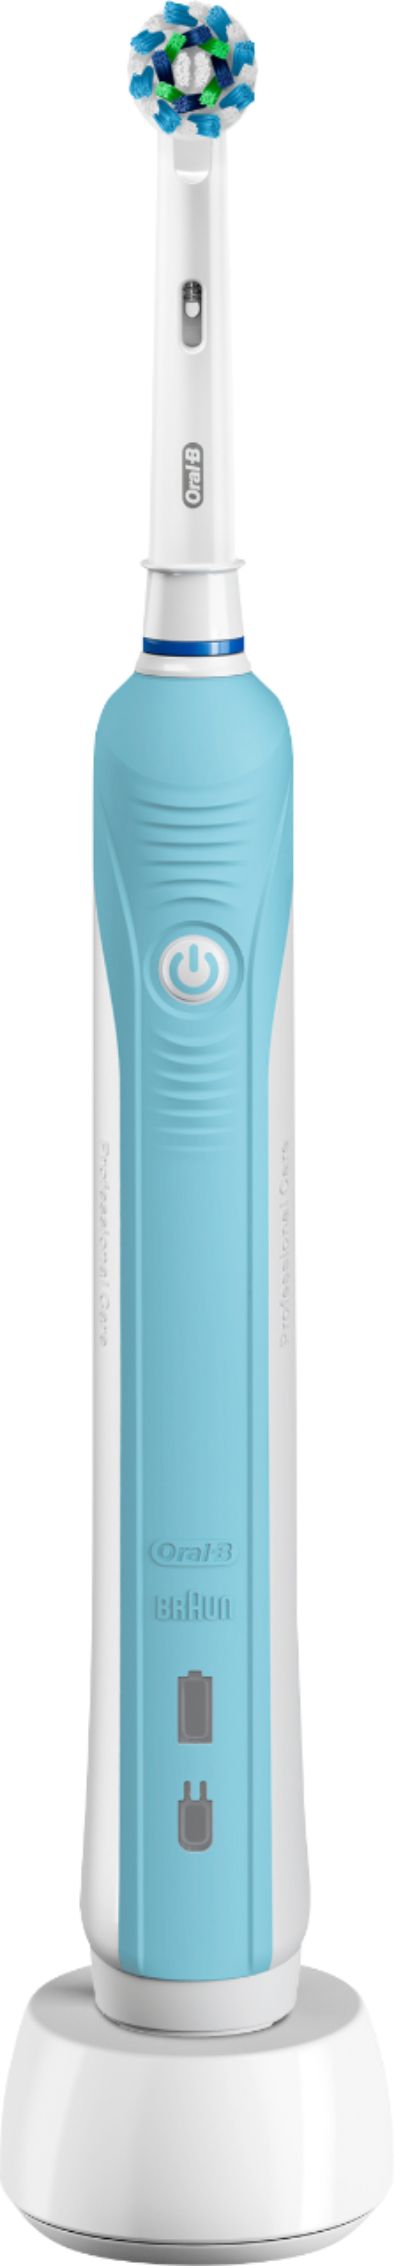 Oral-B - Pro 1000 Electric Toothbrush - White/Blue